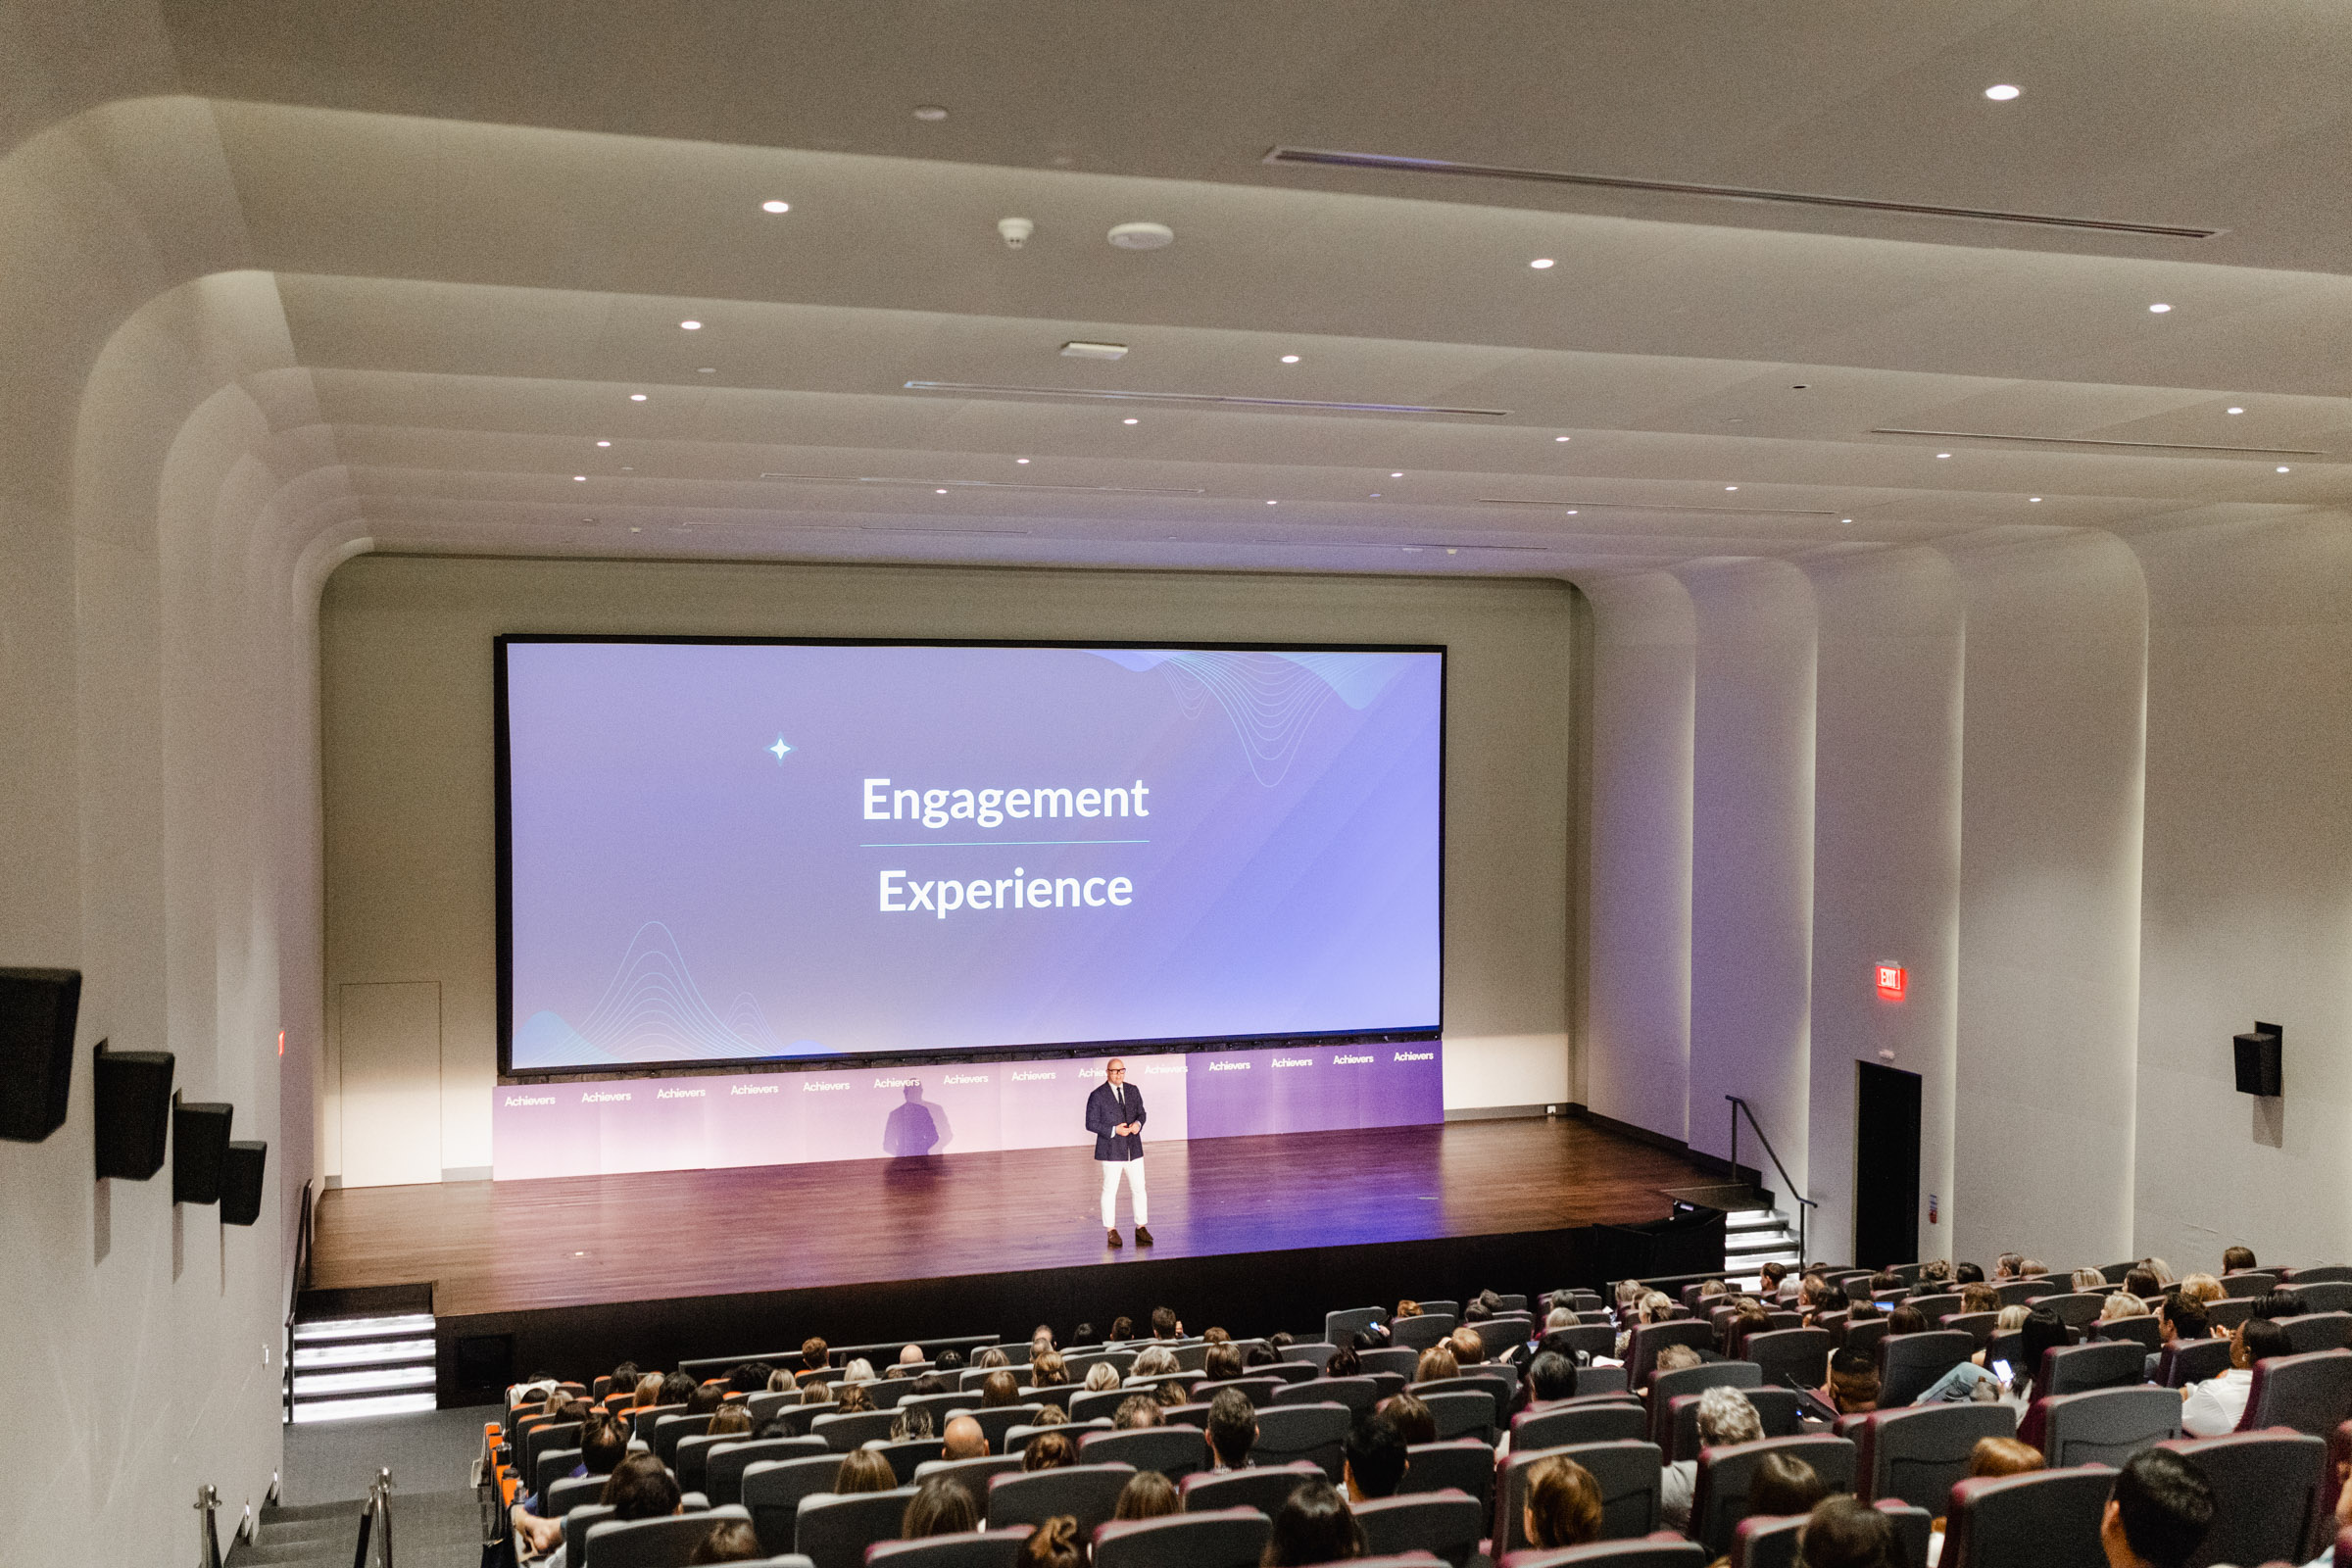 A speaker on stage addresses an audience in a modern lecture hall, with a large screen displaying the words "Engagement" and "Experience." The event photography captures every moment, from the speaker’s passion to the audience's reactions.